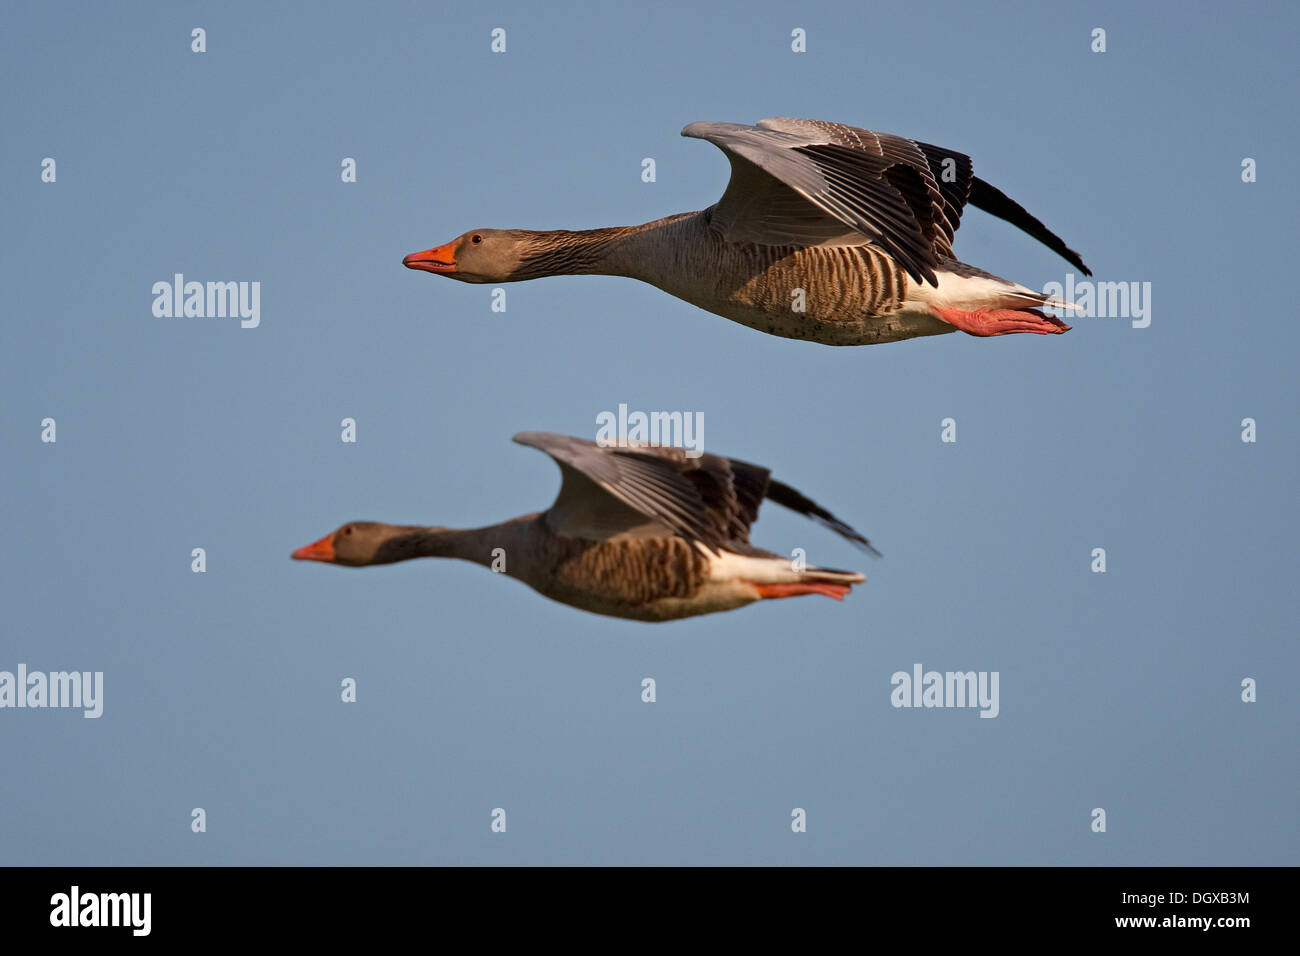 Greylag or Graylag geese (Anser anser) in flight, Texel, The Netherlands, Europe Stock Photo